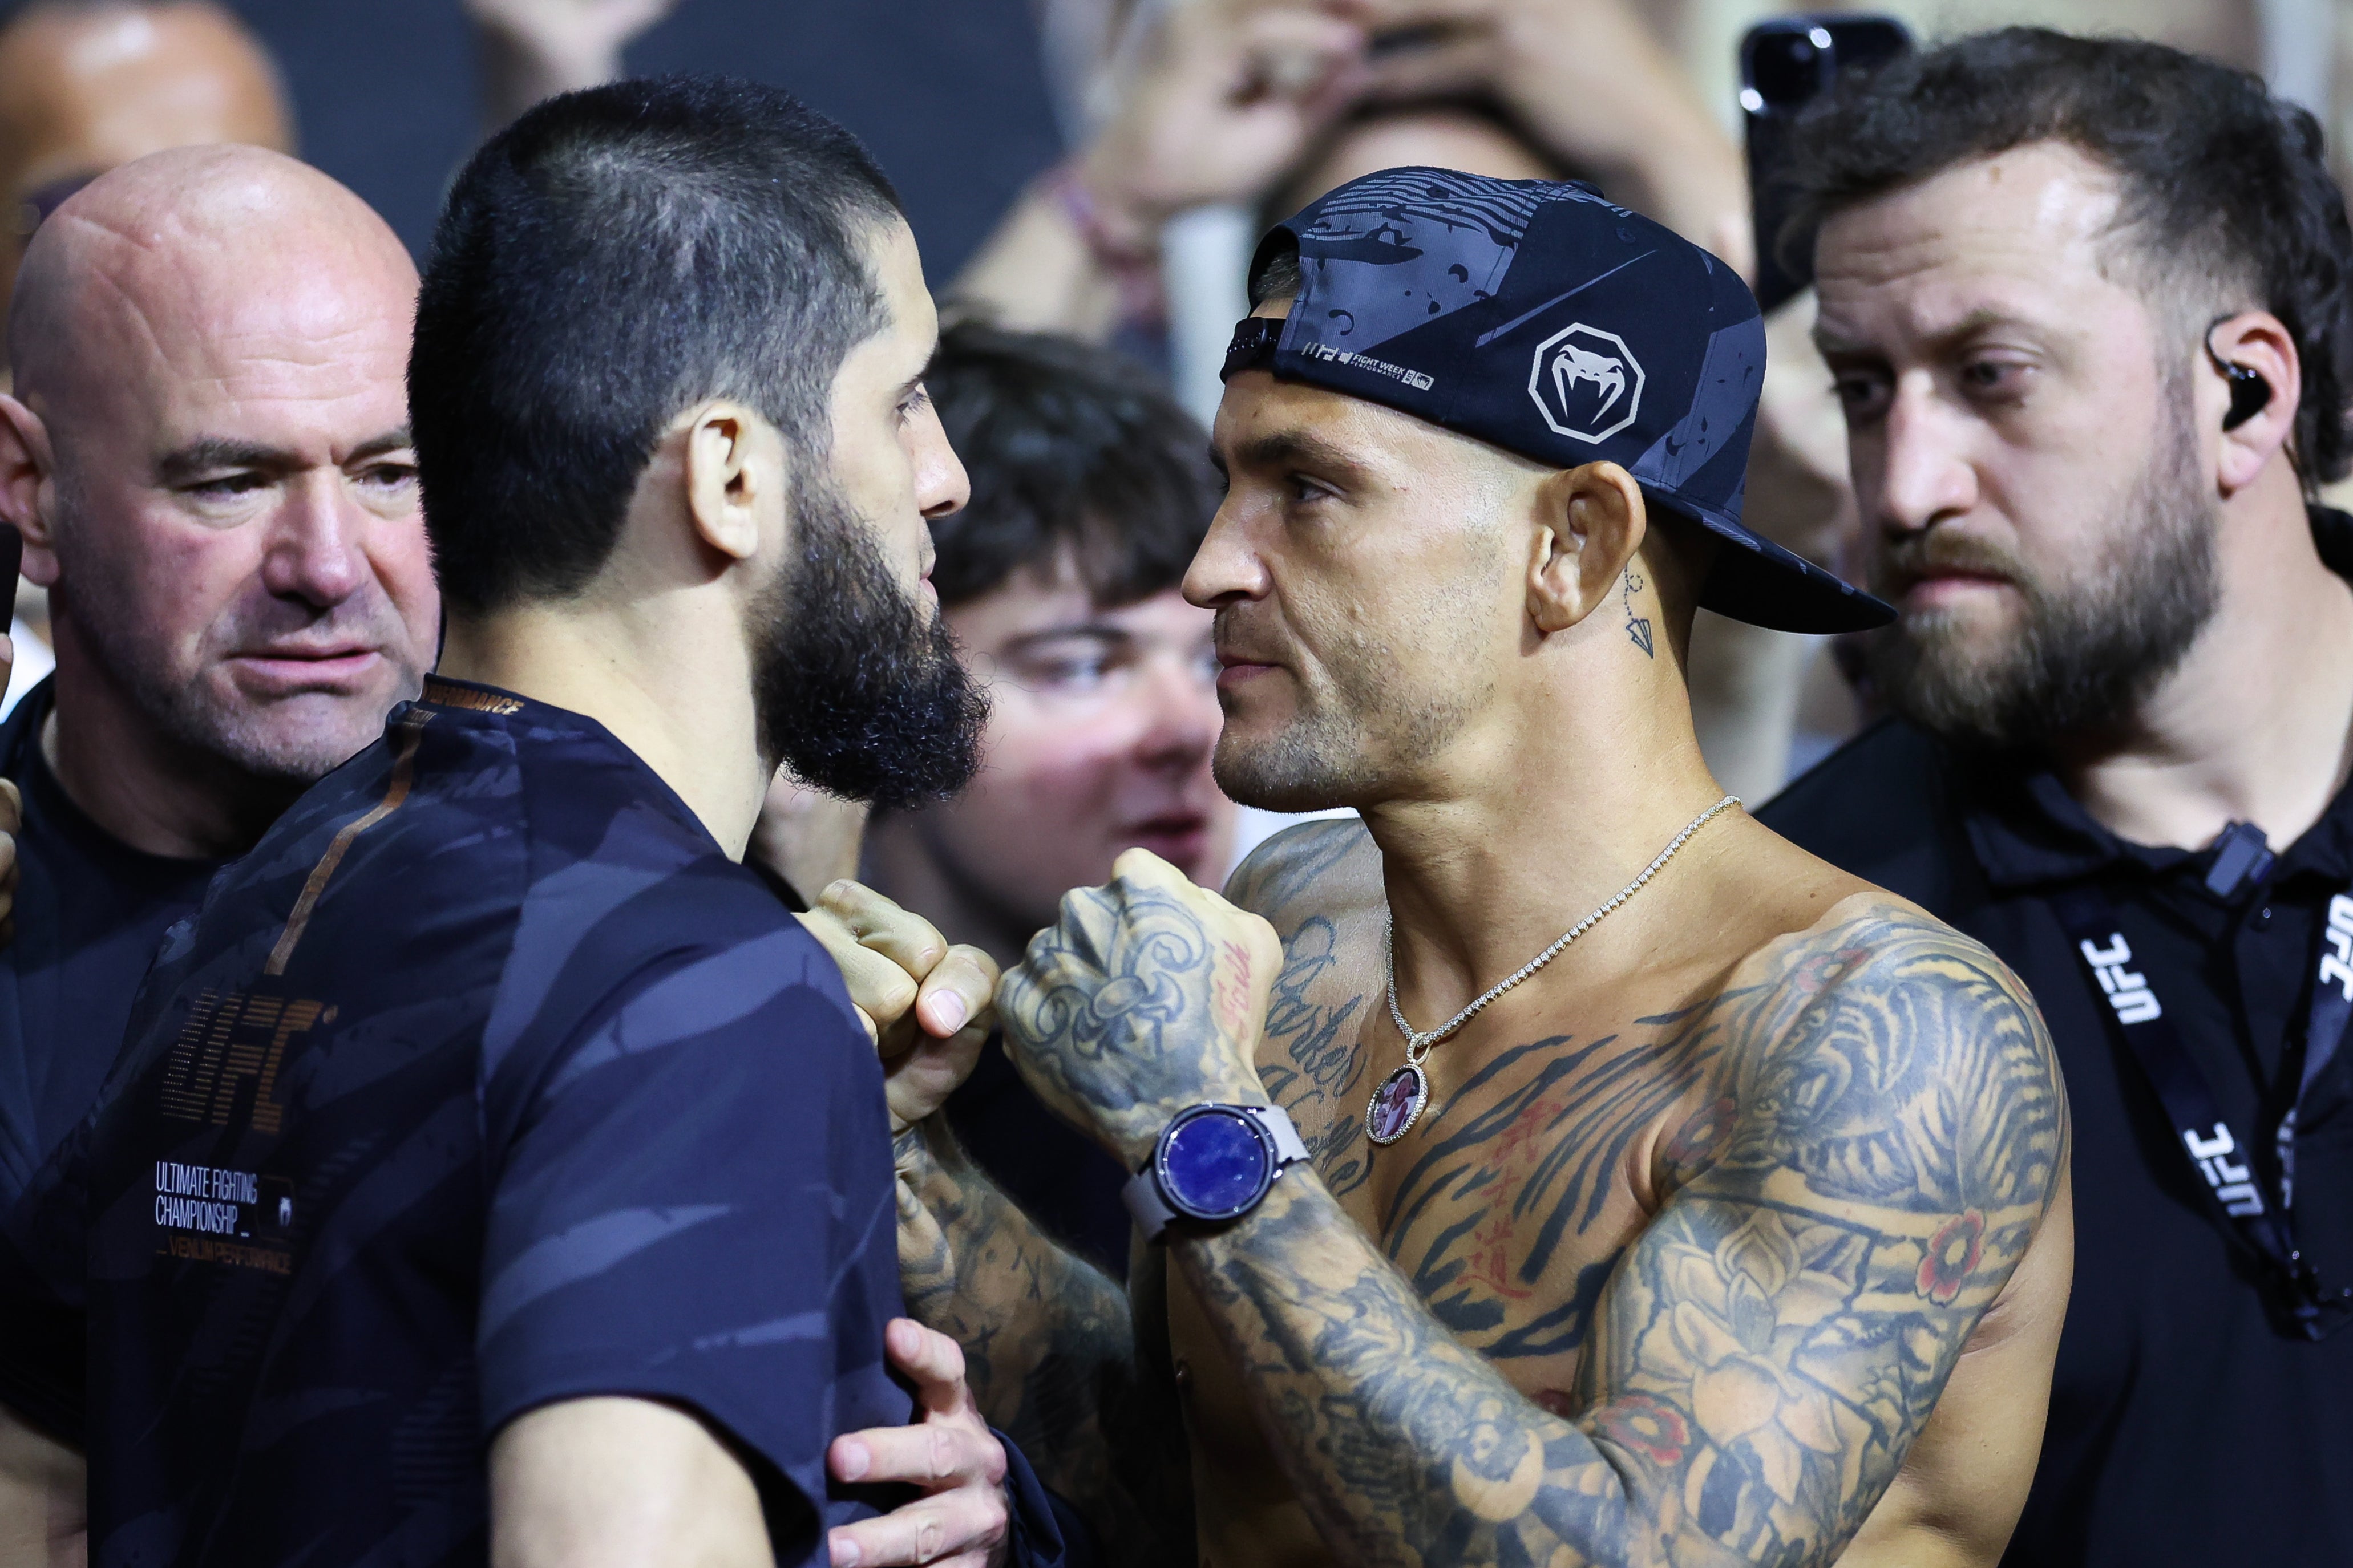 Islam Makhachev (left) facing off with Dustin Poirier on Friday